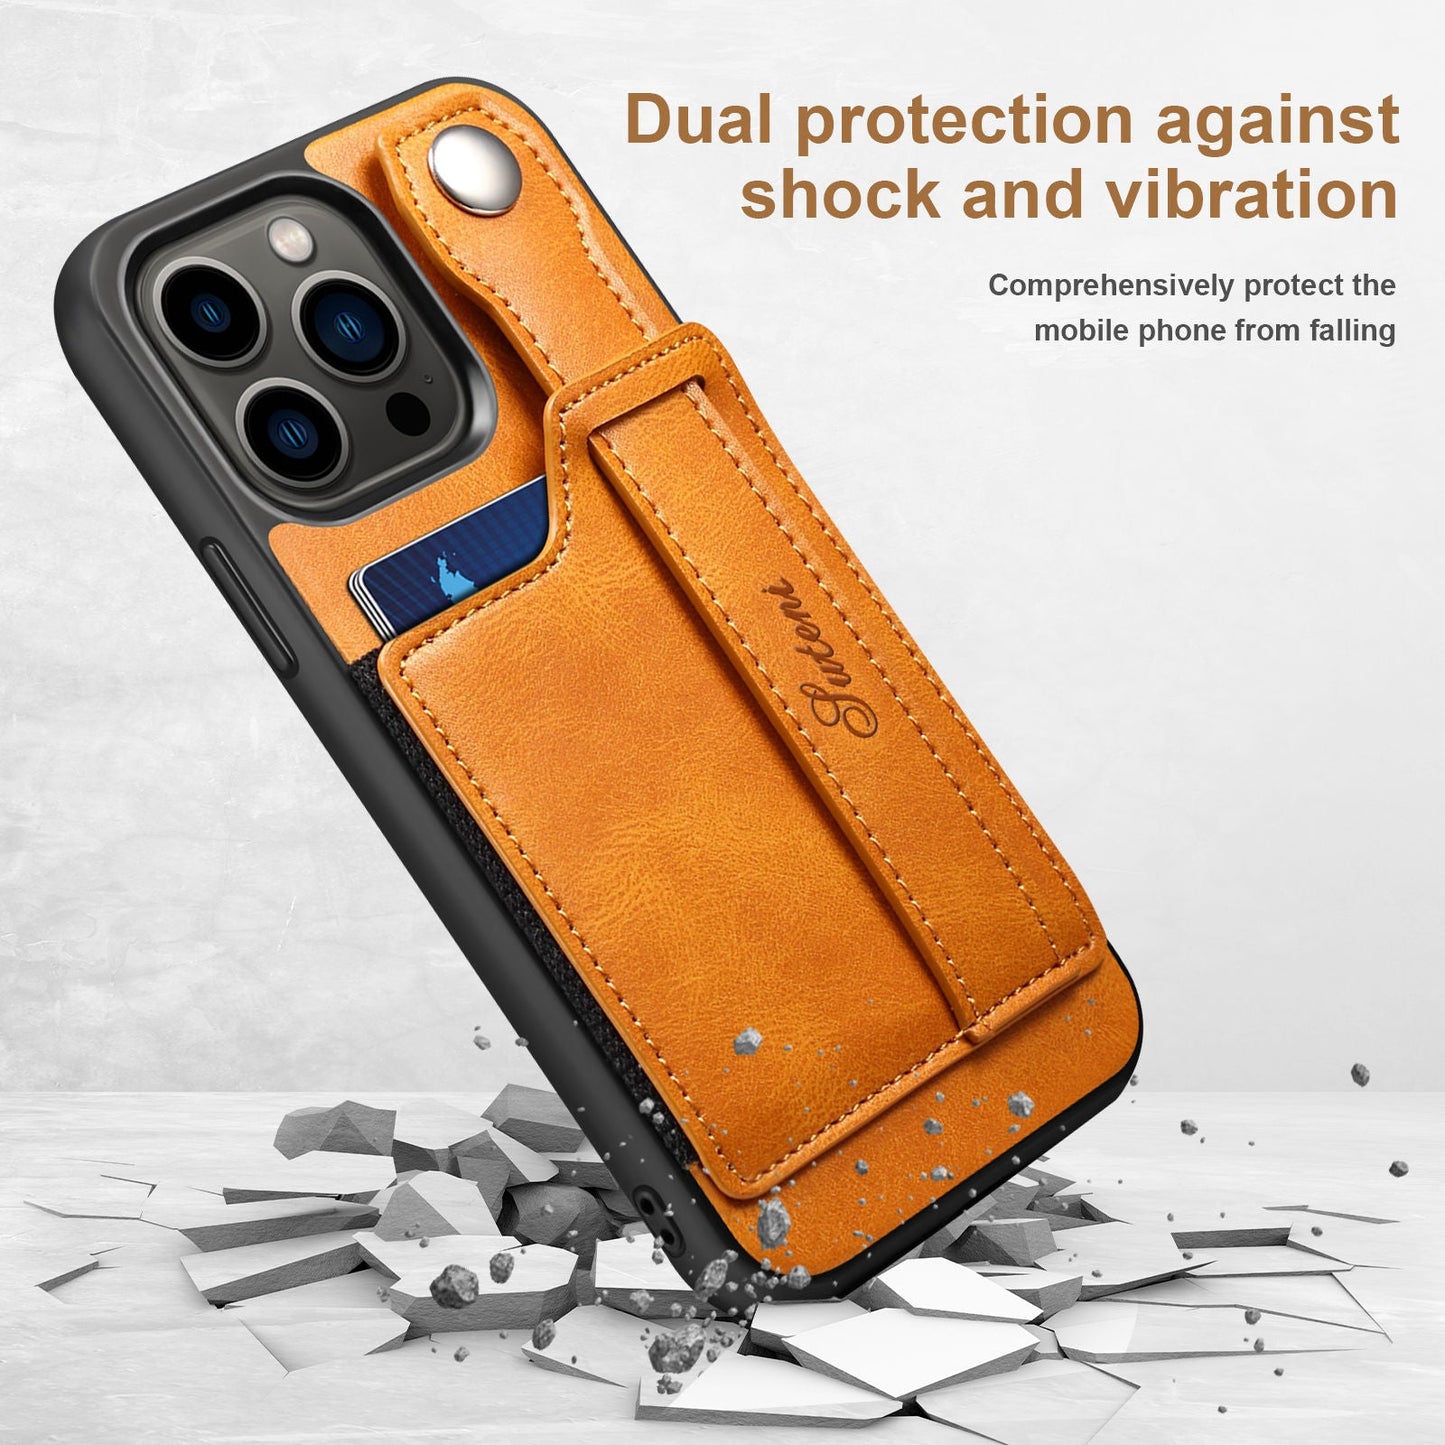 iPhone 14 Pro Max Case PU Leather Wallet Flip Cover Stand Feature with Wrist Strap and Credit Cards Pocket-Shalav5